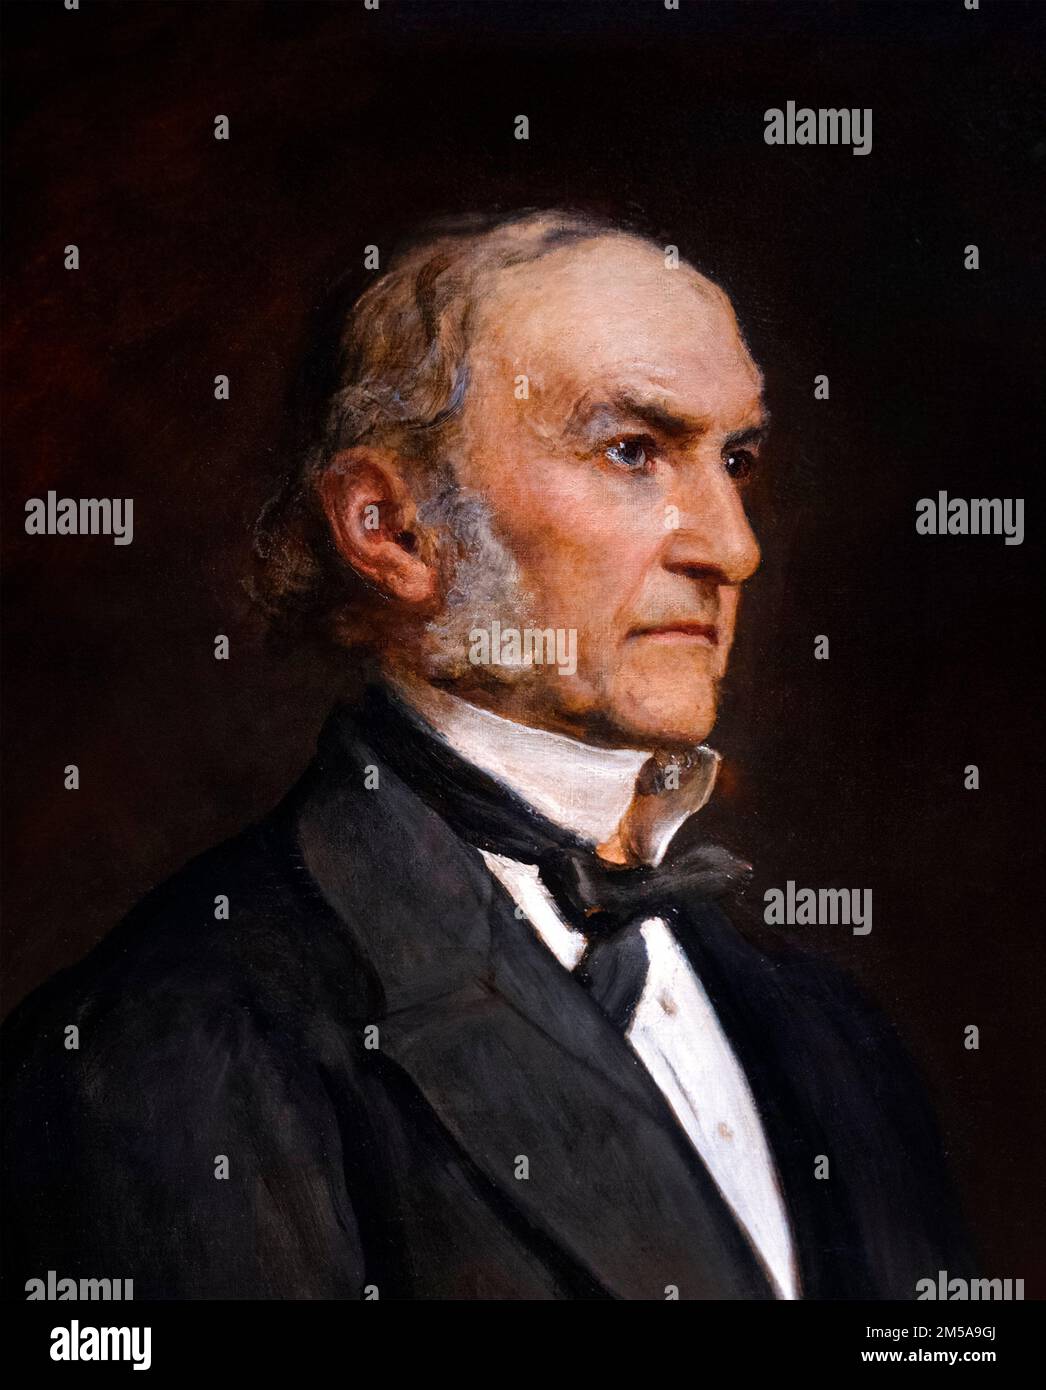 William Gladstone. Portrait of William Ewart Gladstone (1809-1898), a British Liberal politician who served as Prime Minister four separate times (1868–74, 1880–85, February–July 1886 and 1892–94). Painting by Sir John Everett Millais, oil on canvas, 1879. Stock Photo